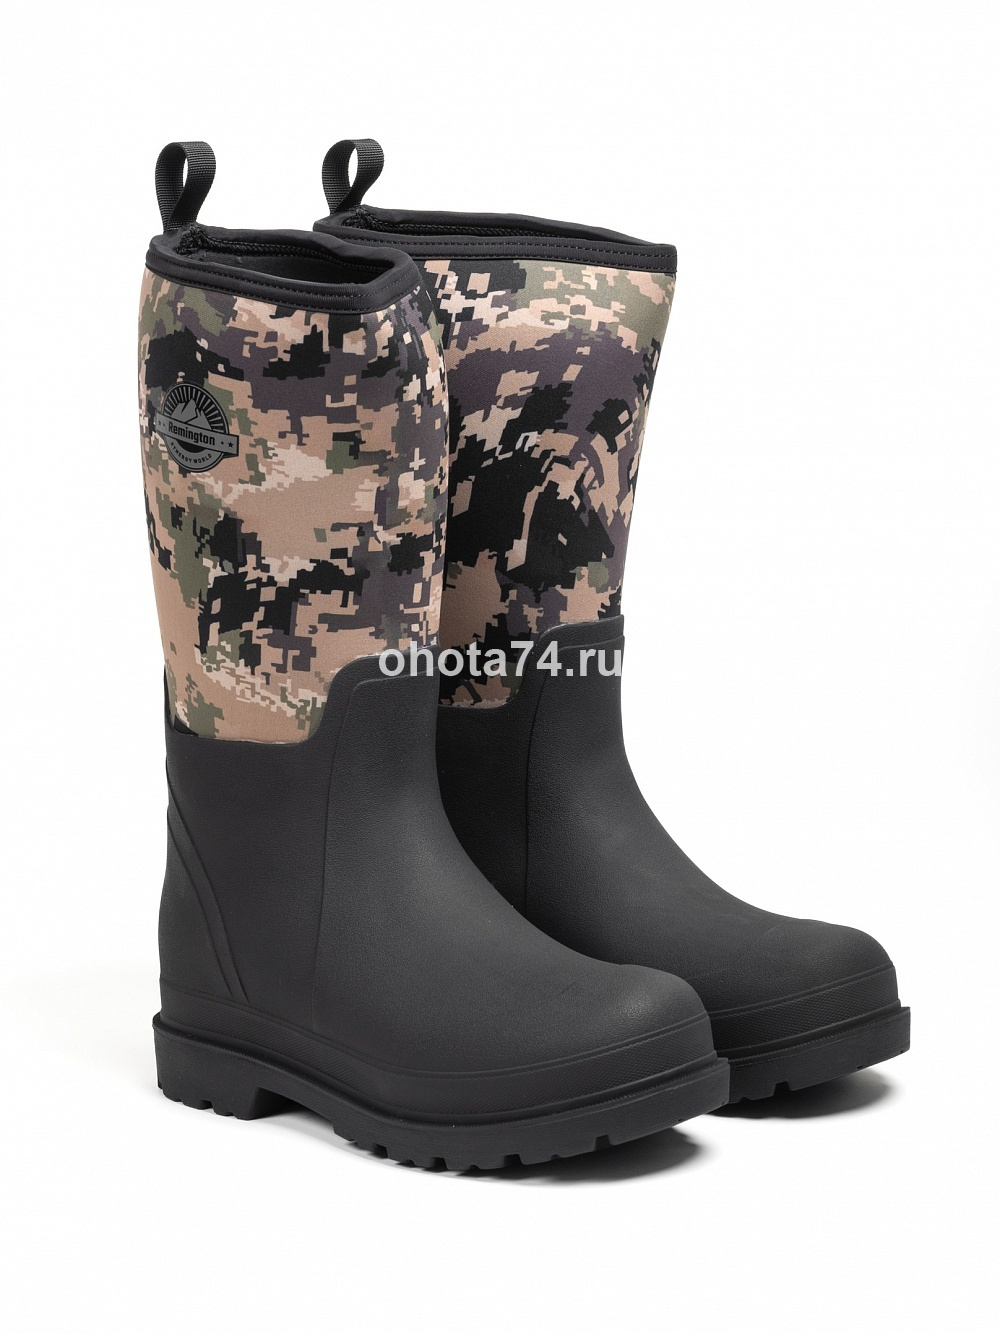   Remington Rubber Boots Camo Green Forest .43/RF2605-997   " "